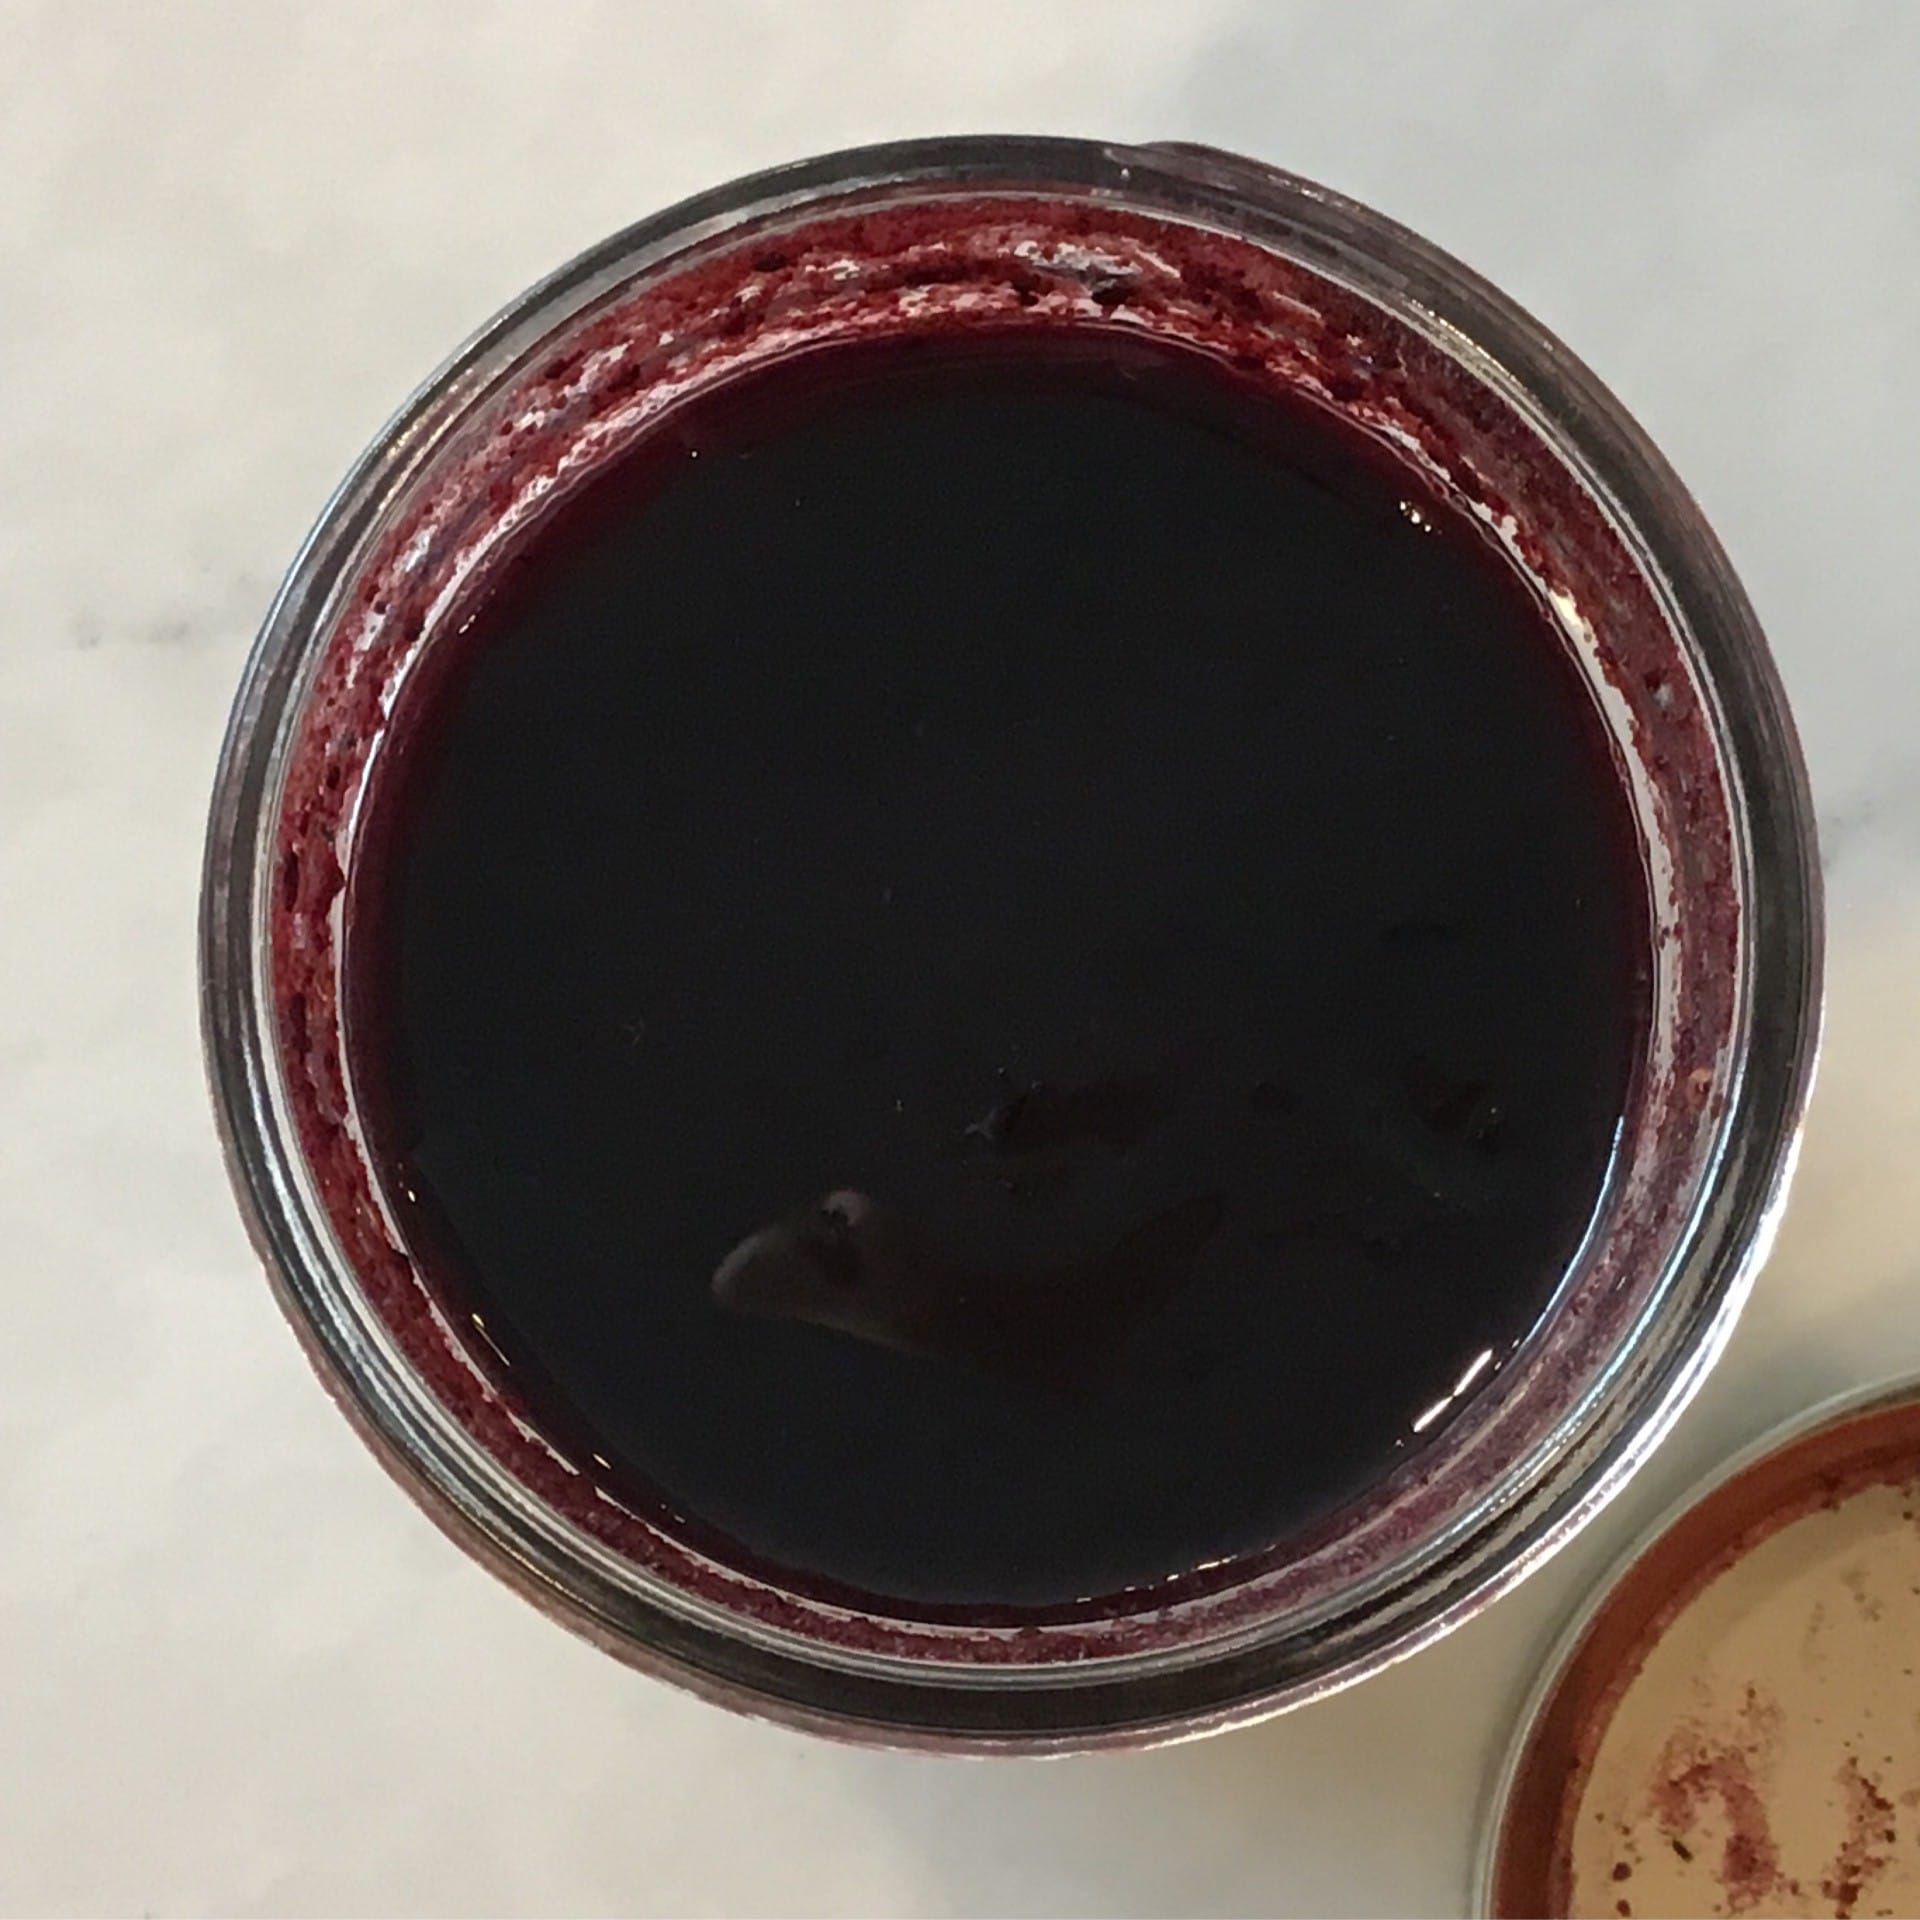 sold out aronia berry and rhubarb jam